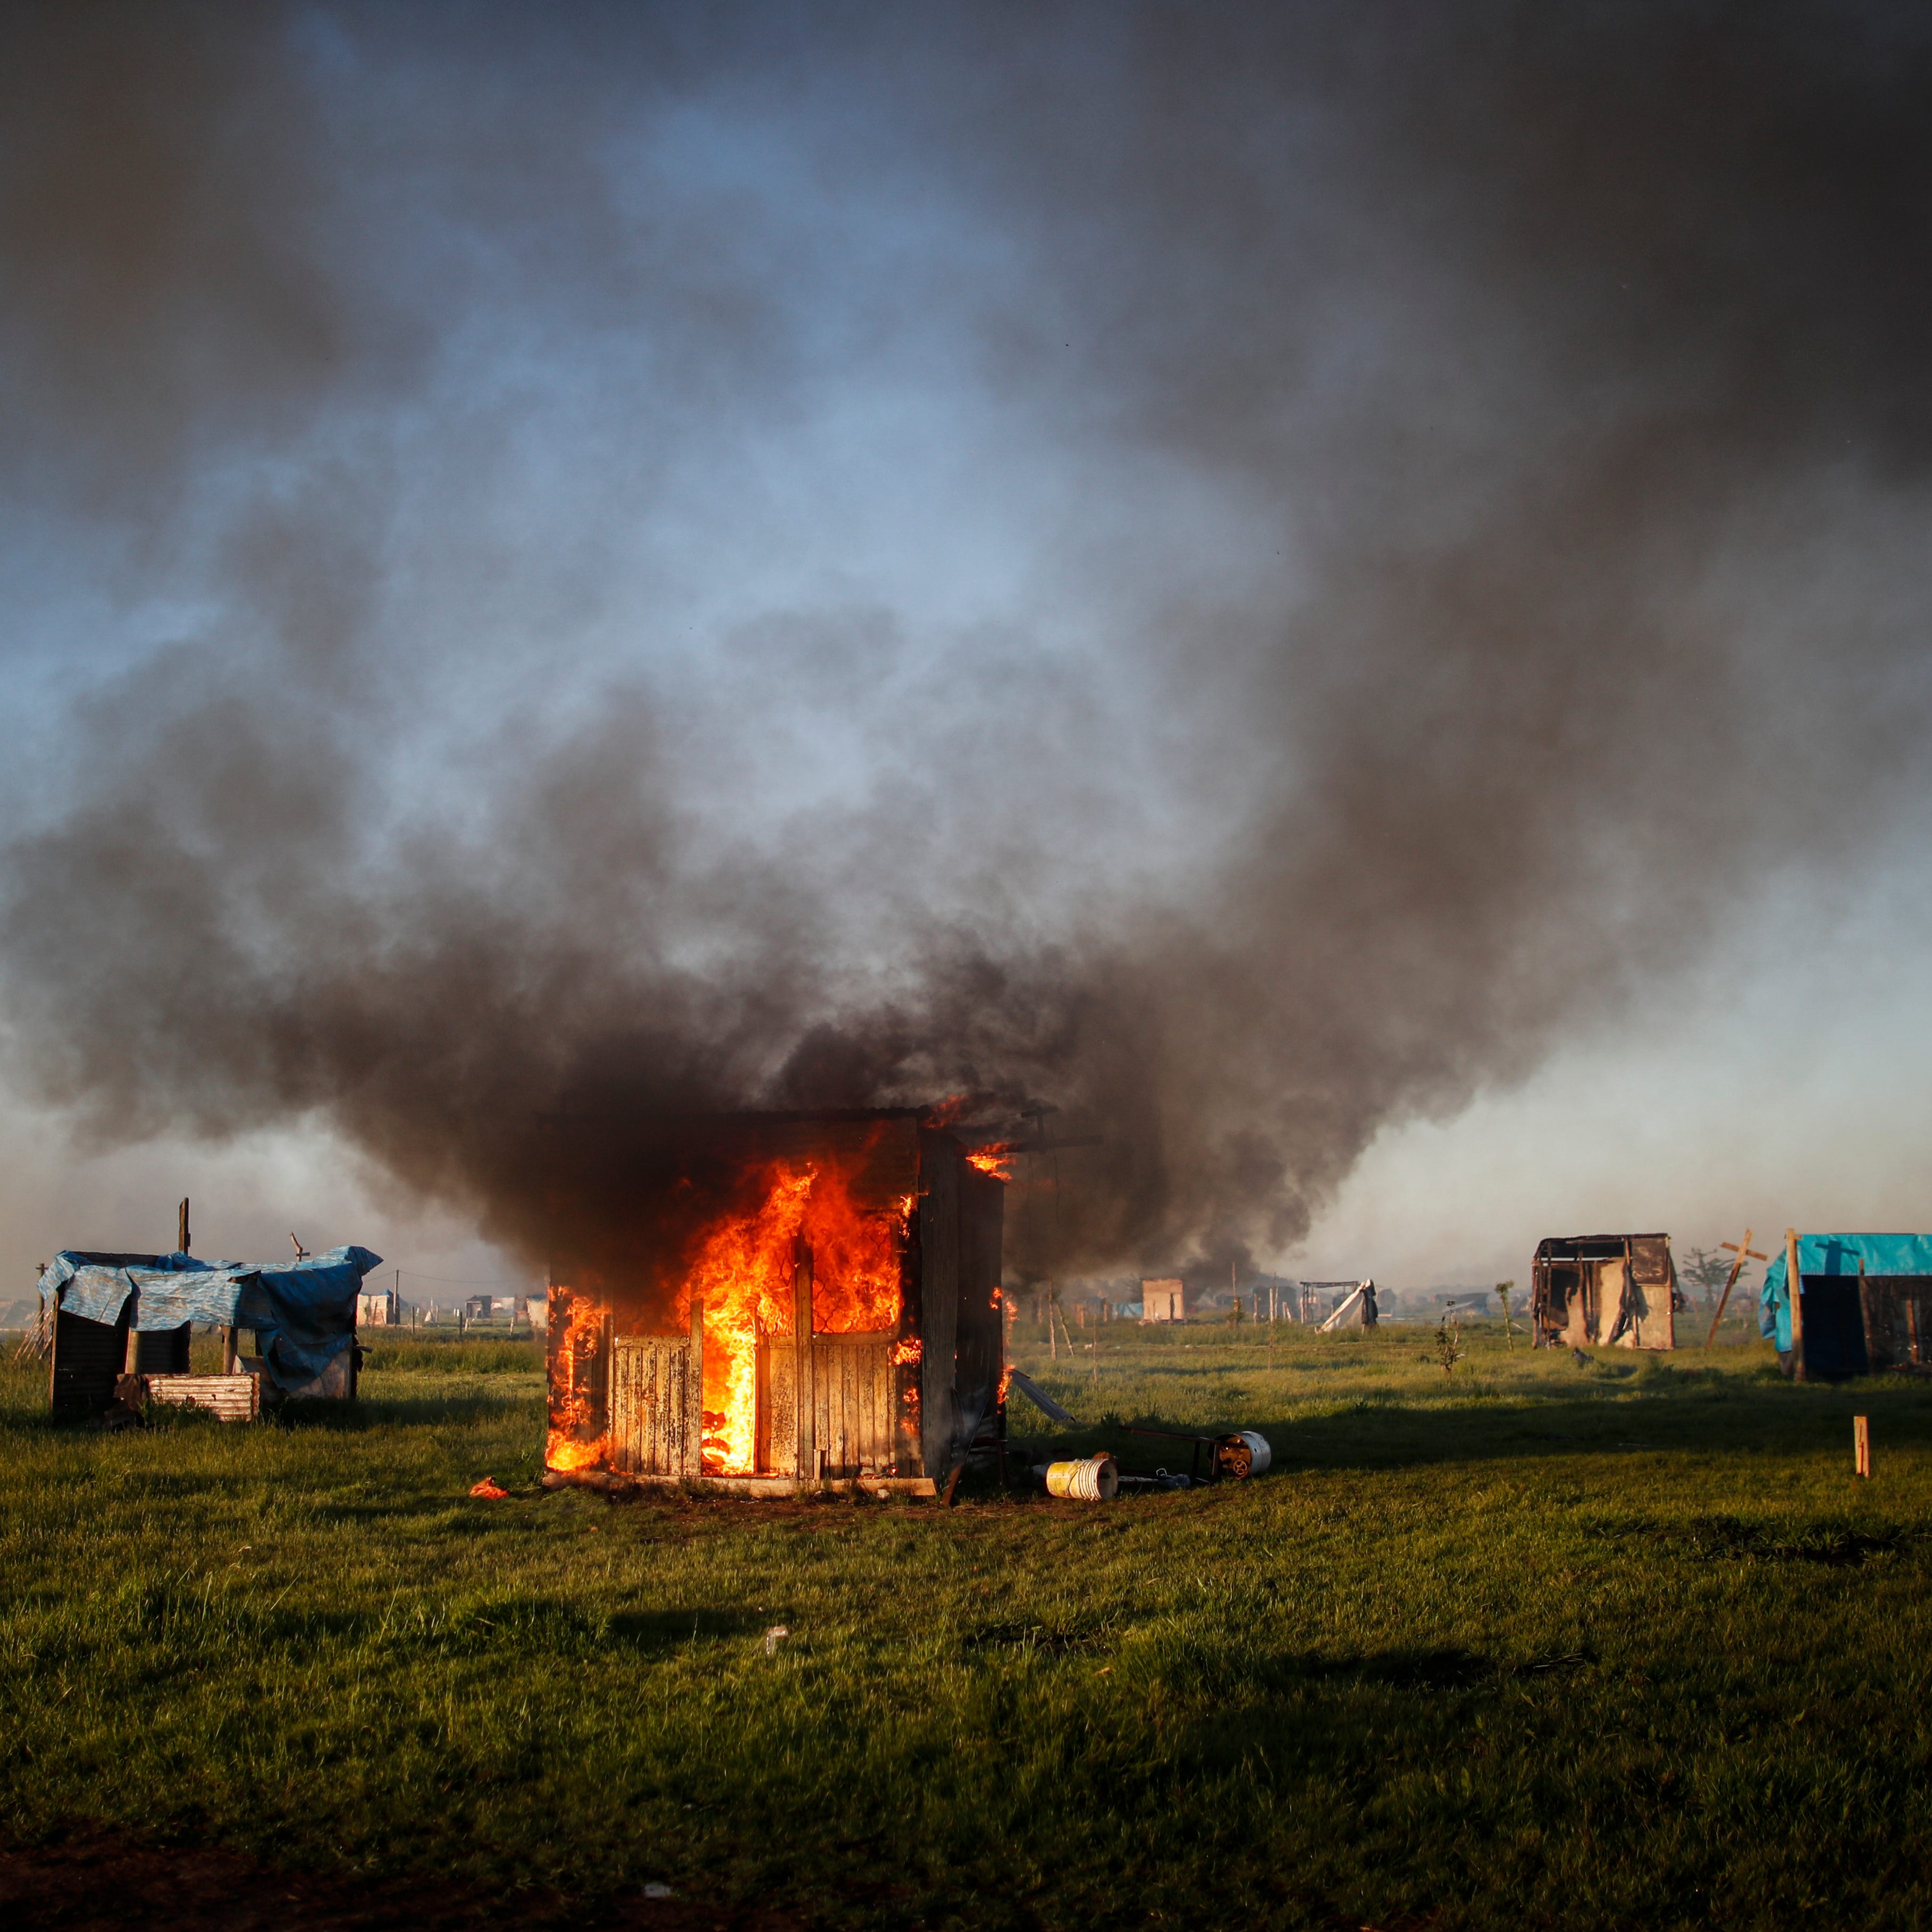 A shack home burns as people are evicted from a squatters camp by police in Guernica, Buenos Aires province, Argentina, Thursday, Oct. 29, 2020. A court ordered the eviction of families who have been squatting at the camp since July, but the families say they have nowhere to go amid the COVID-19 pandemic. 